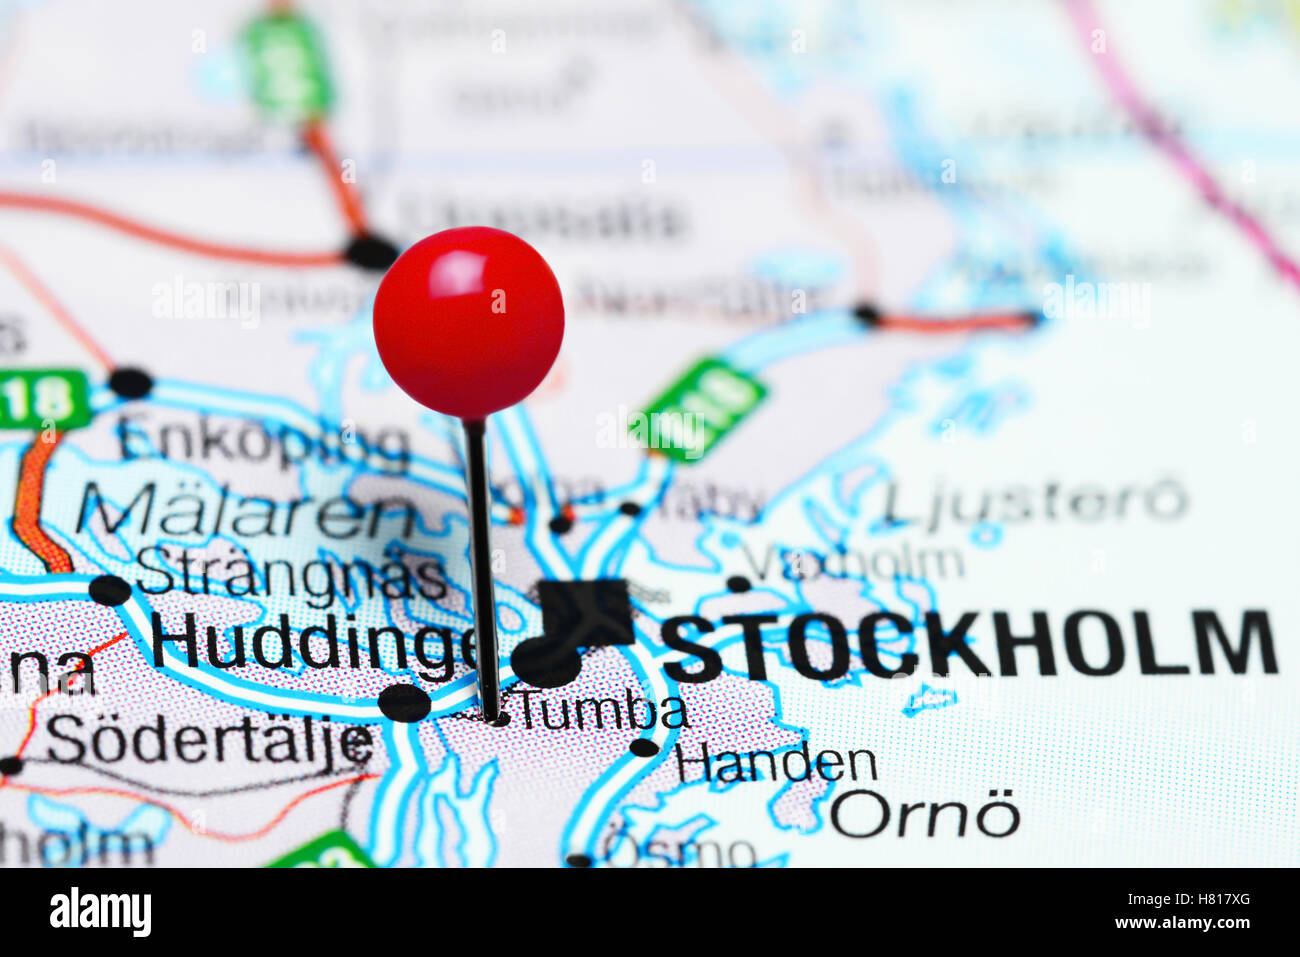 Tumba pinned on a map of Sweden Stock Photo